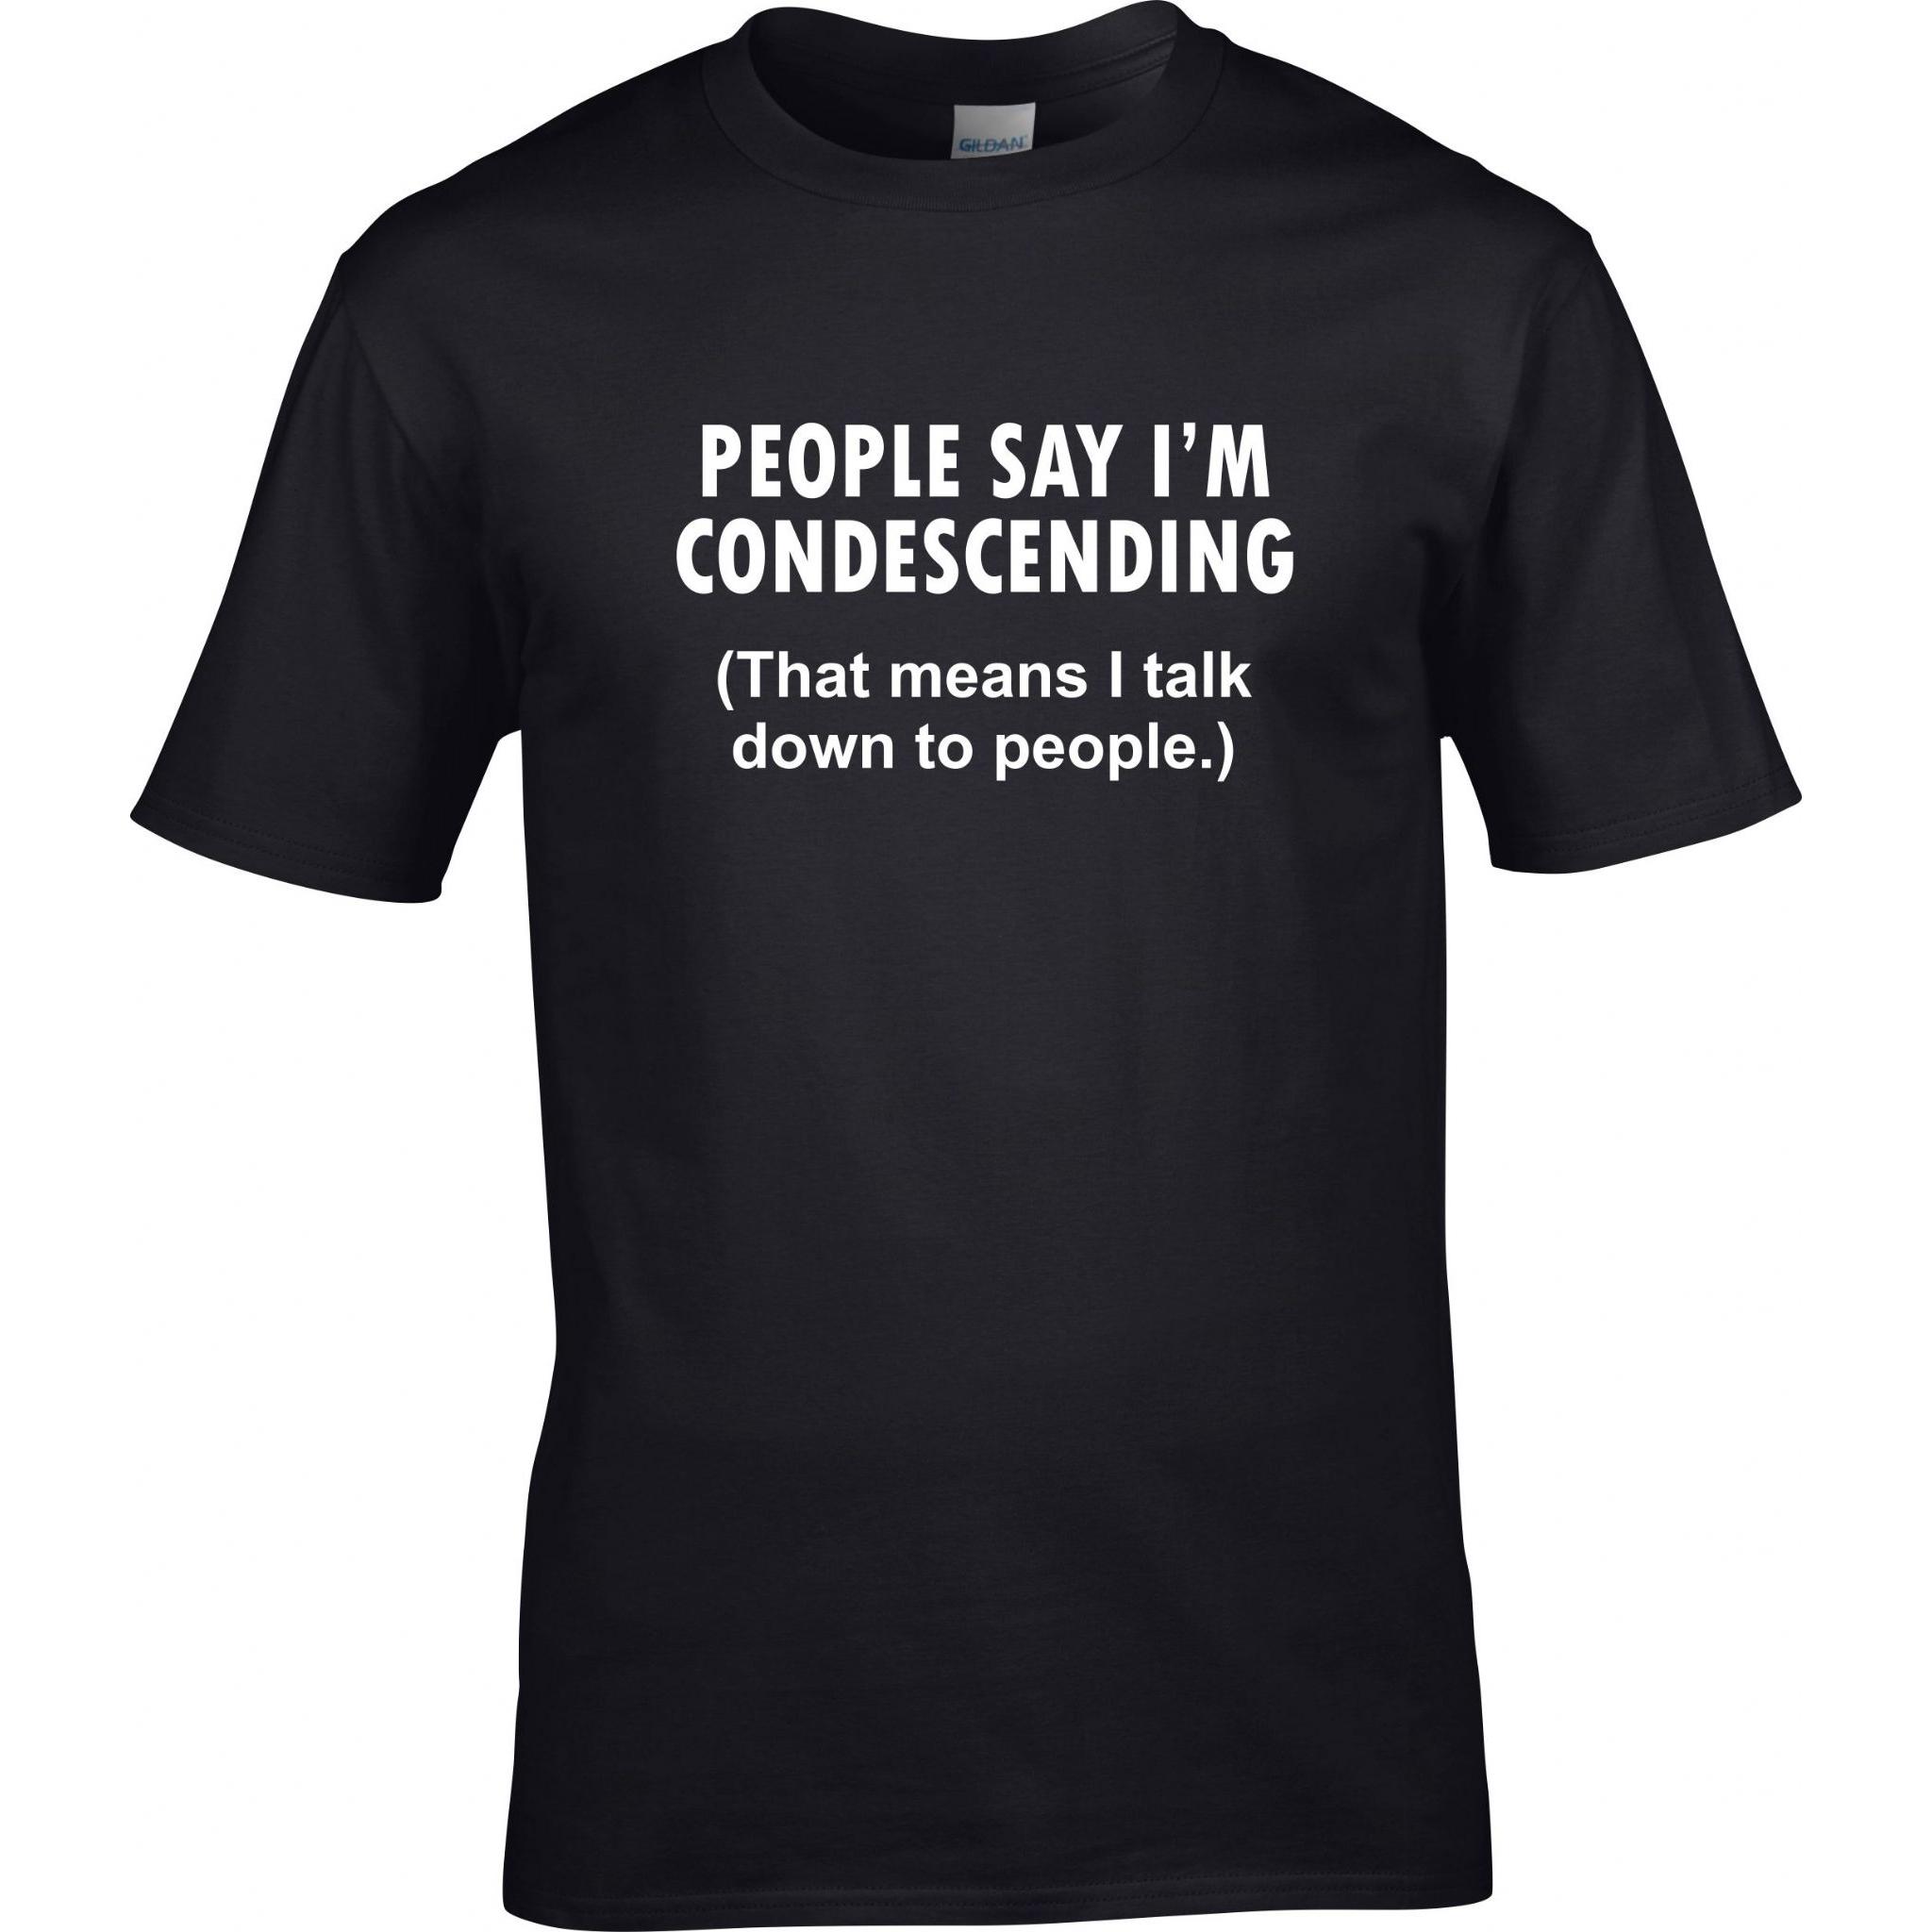 PEOPLE SAY I'M CONDESCENDING (that means I talk down to people)